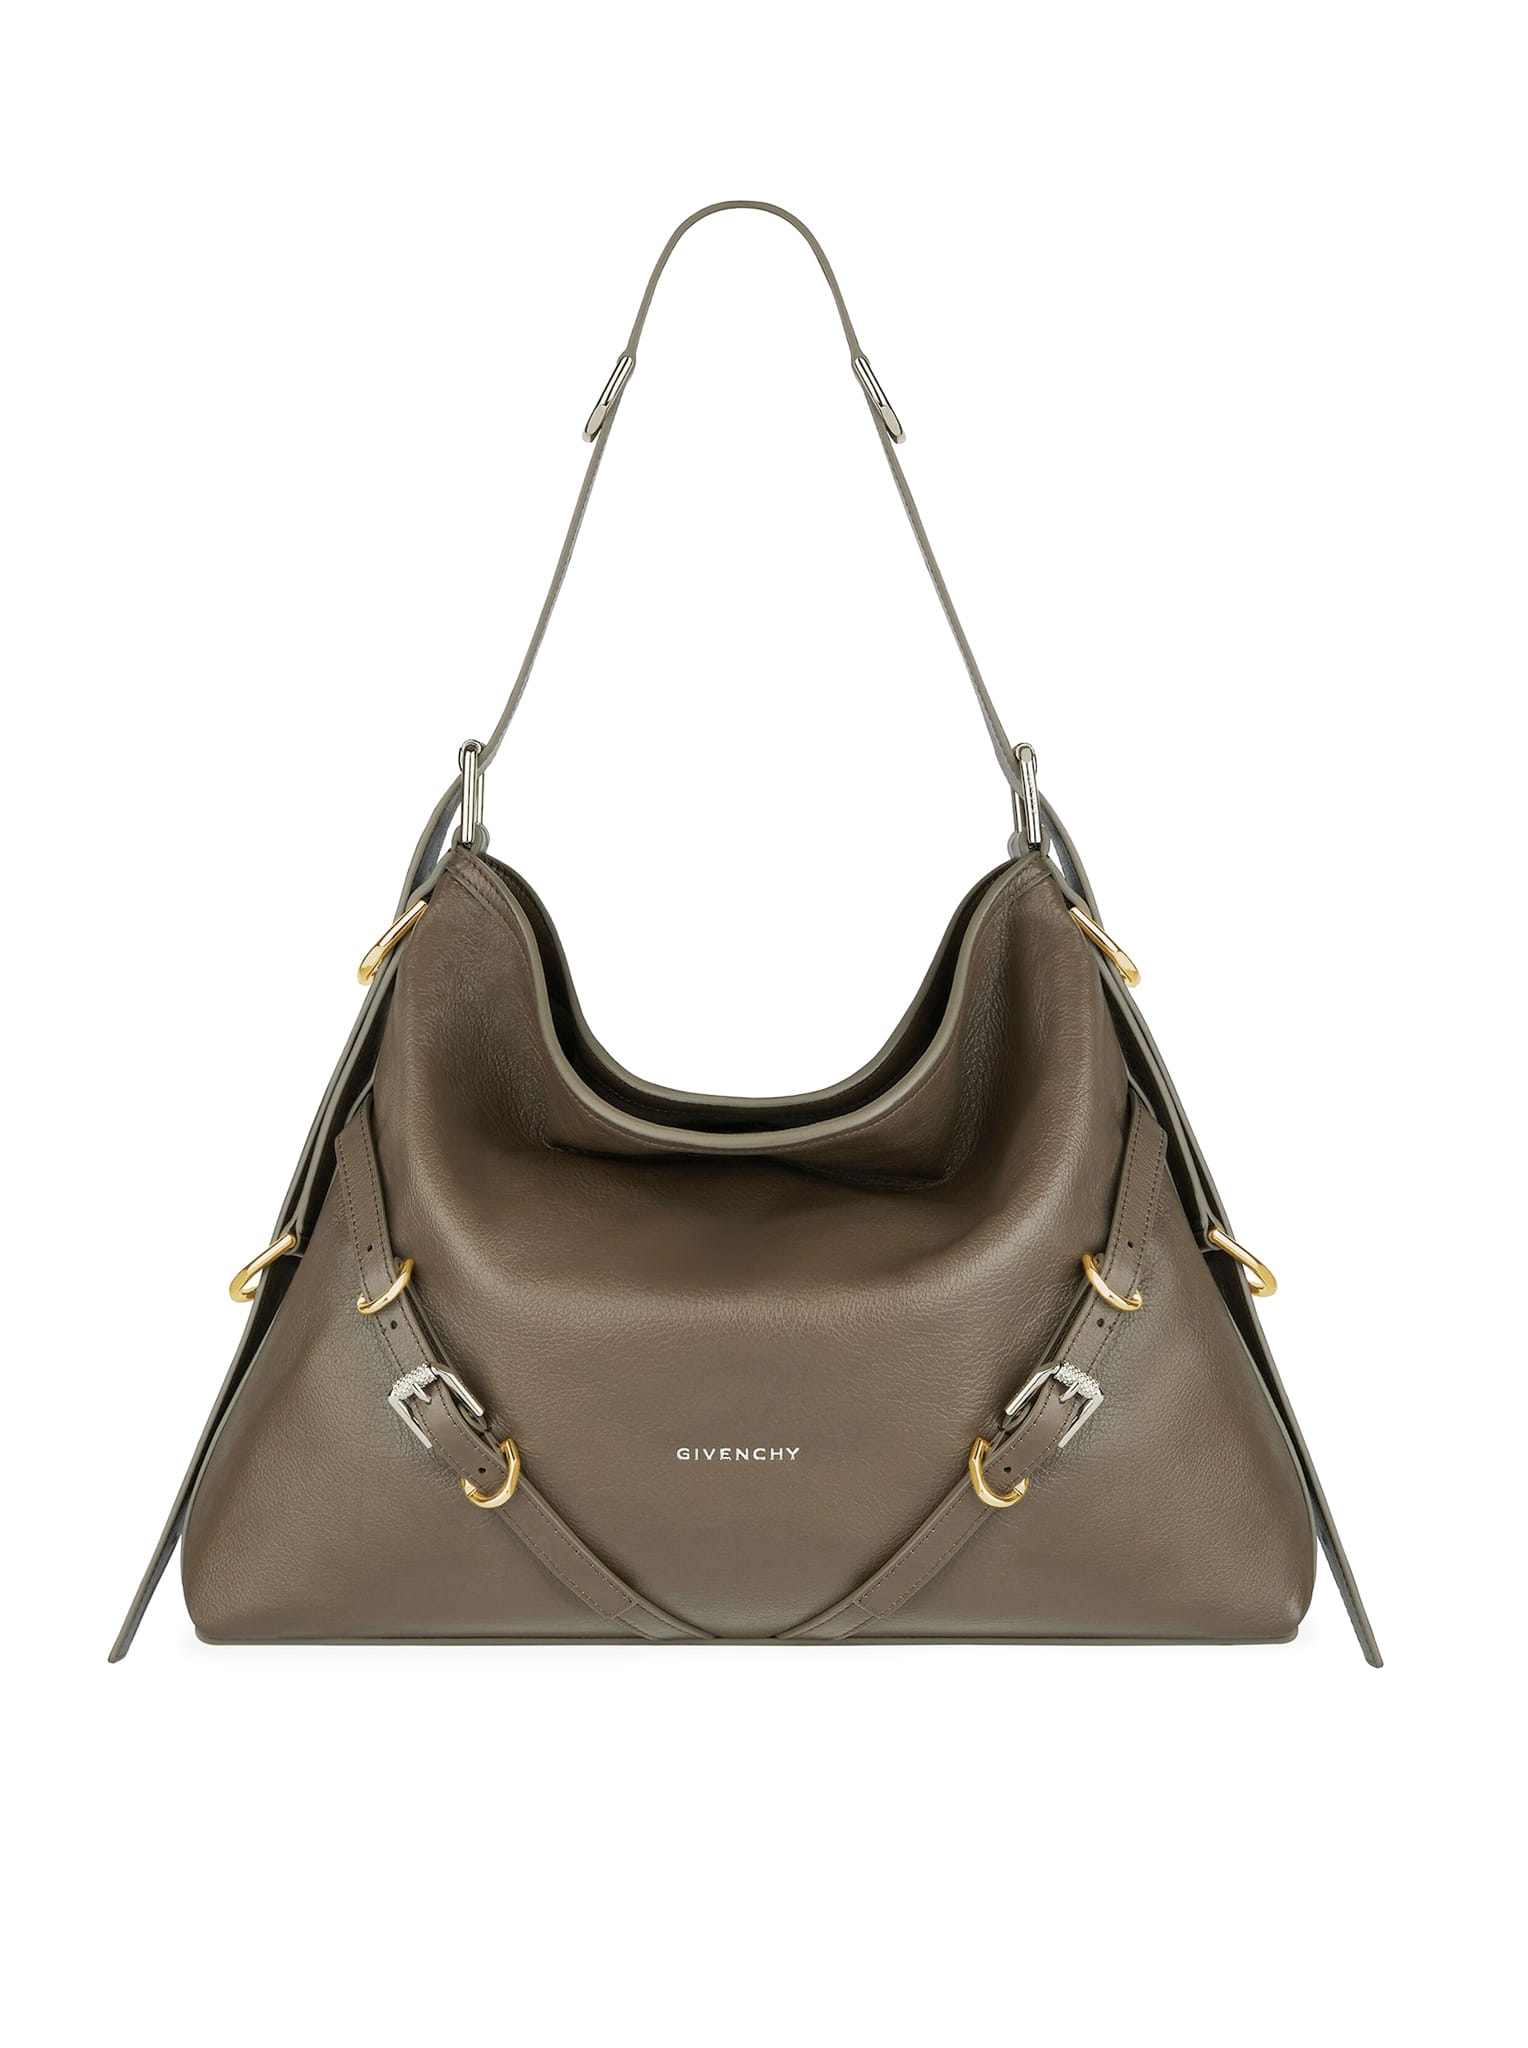 Givenchy Voyou - Medium Bag In Taupe